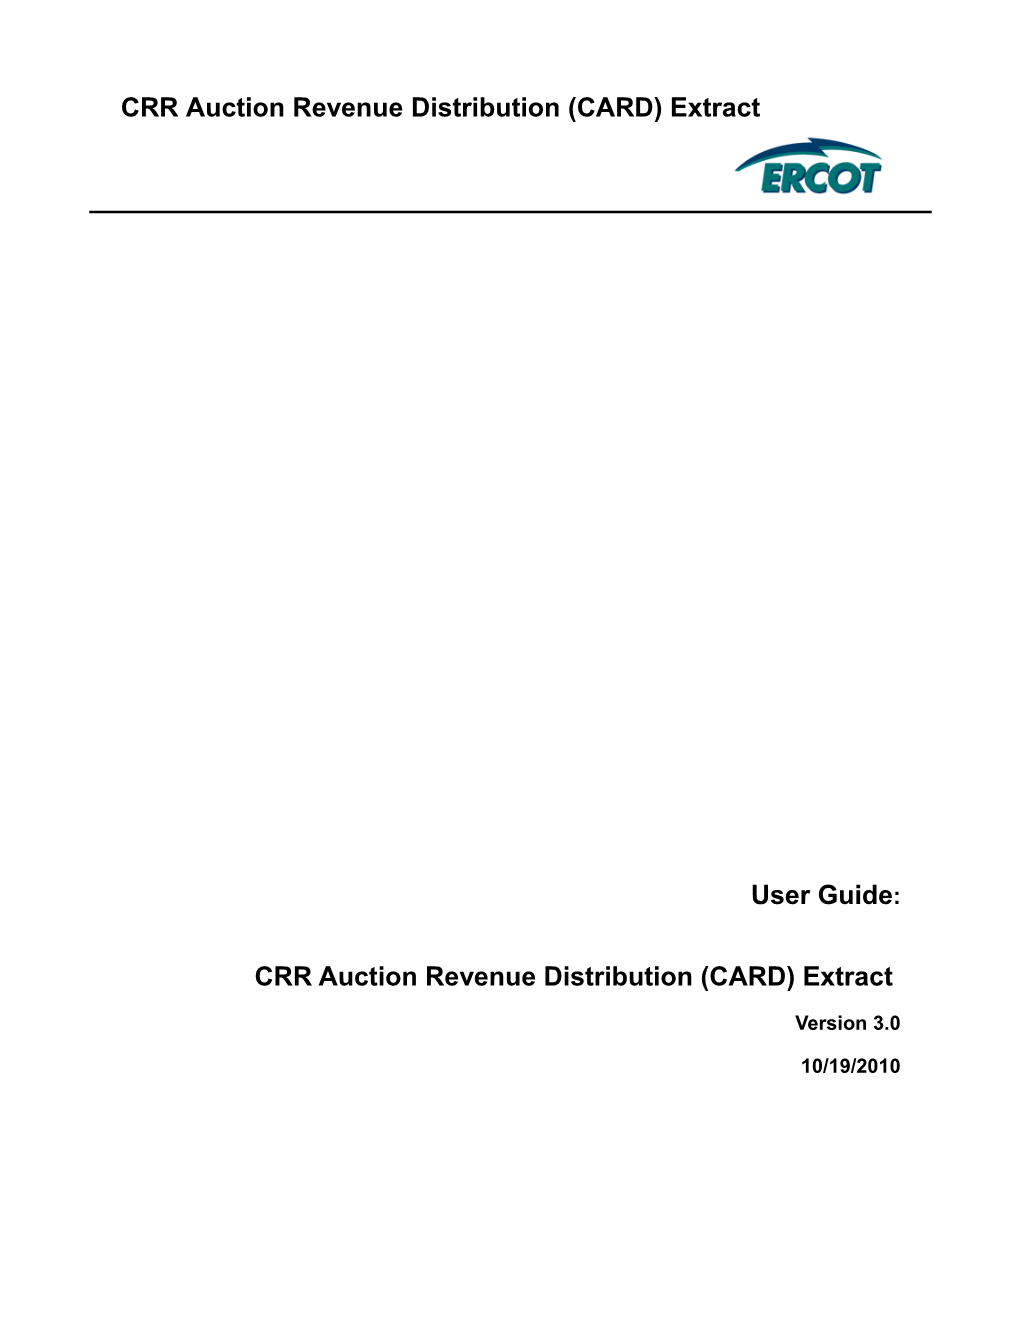 CRR Auction Revenue Distribution (CARD) Extract